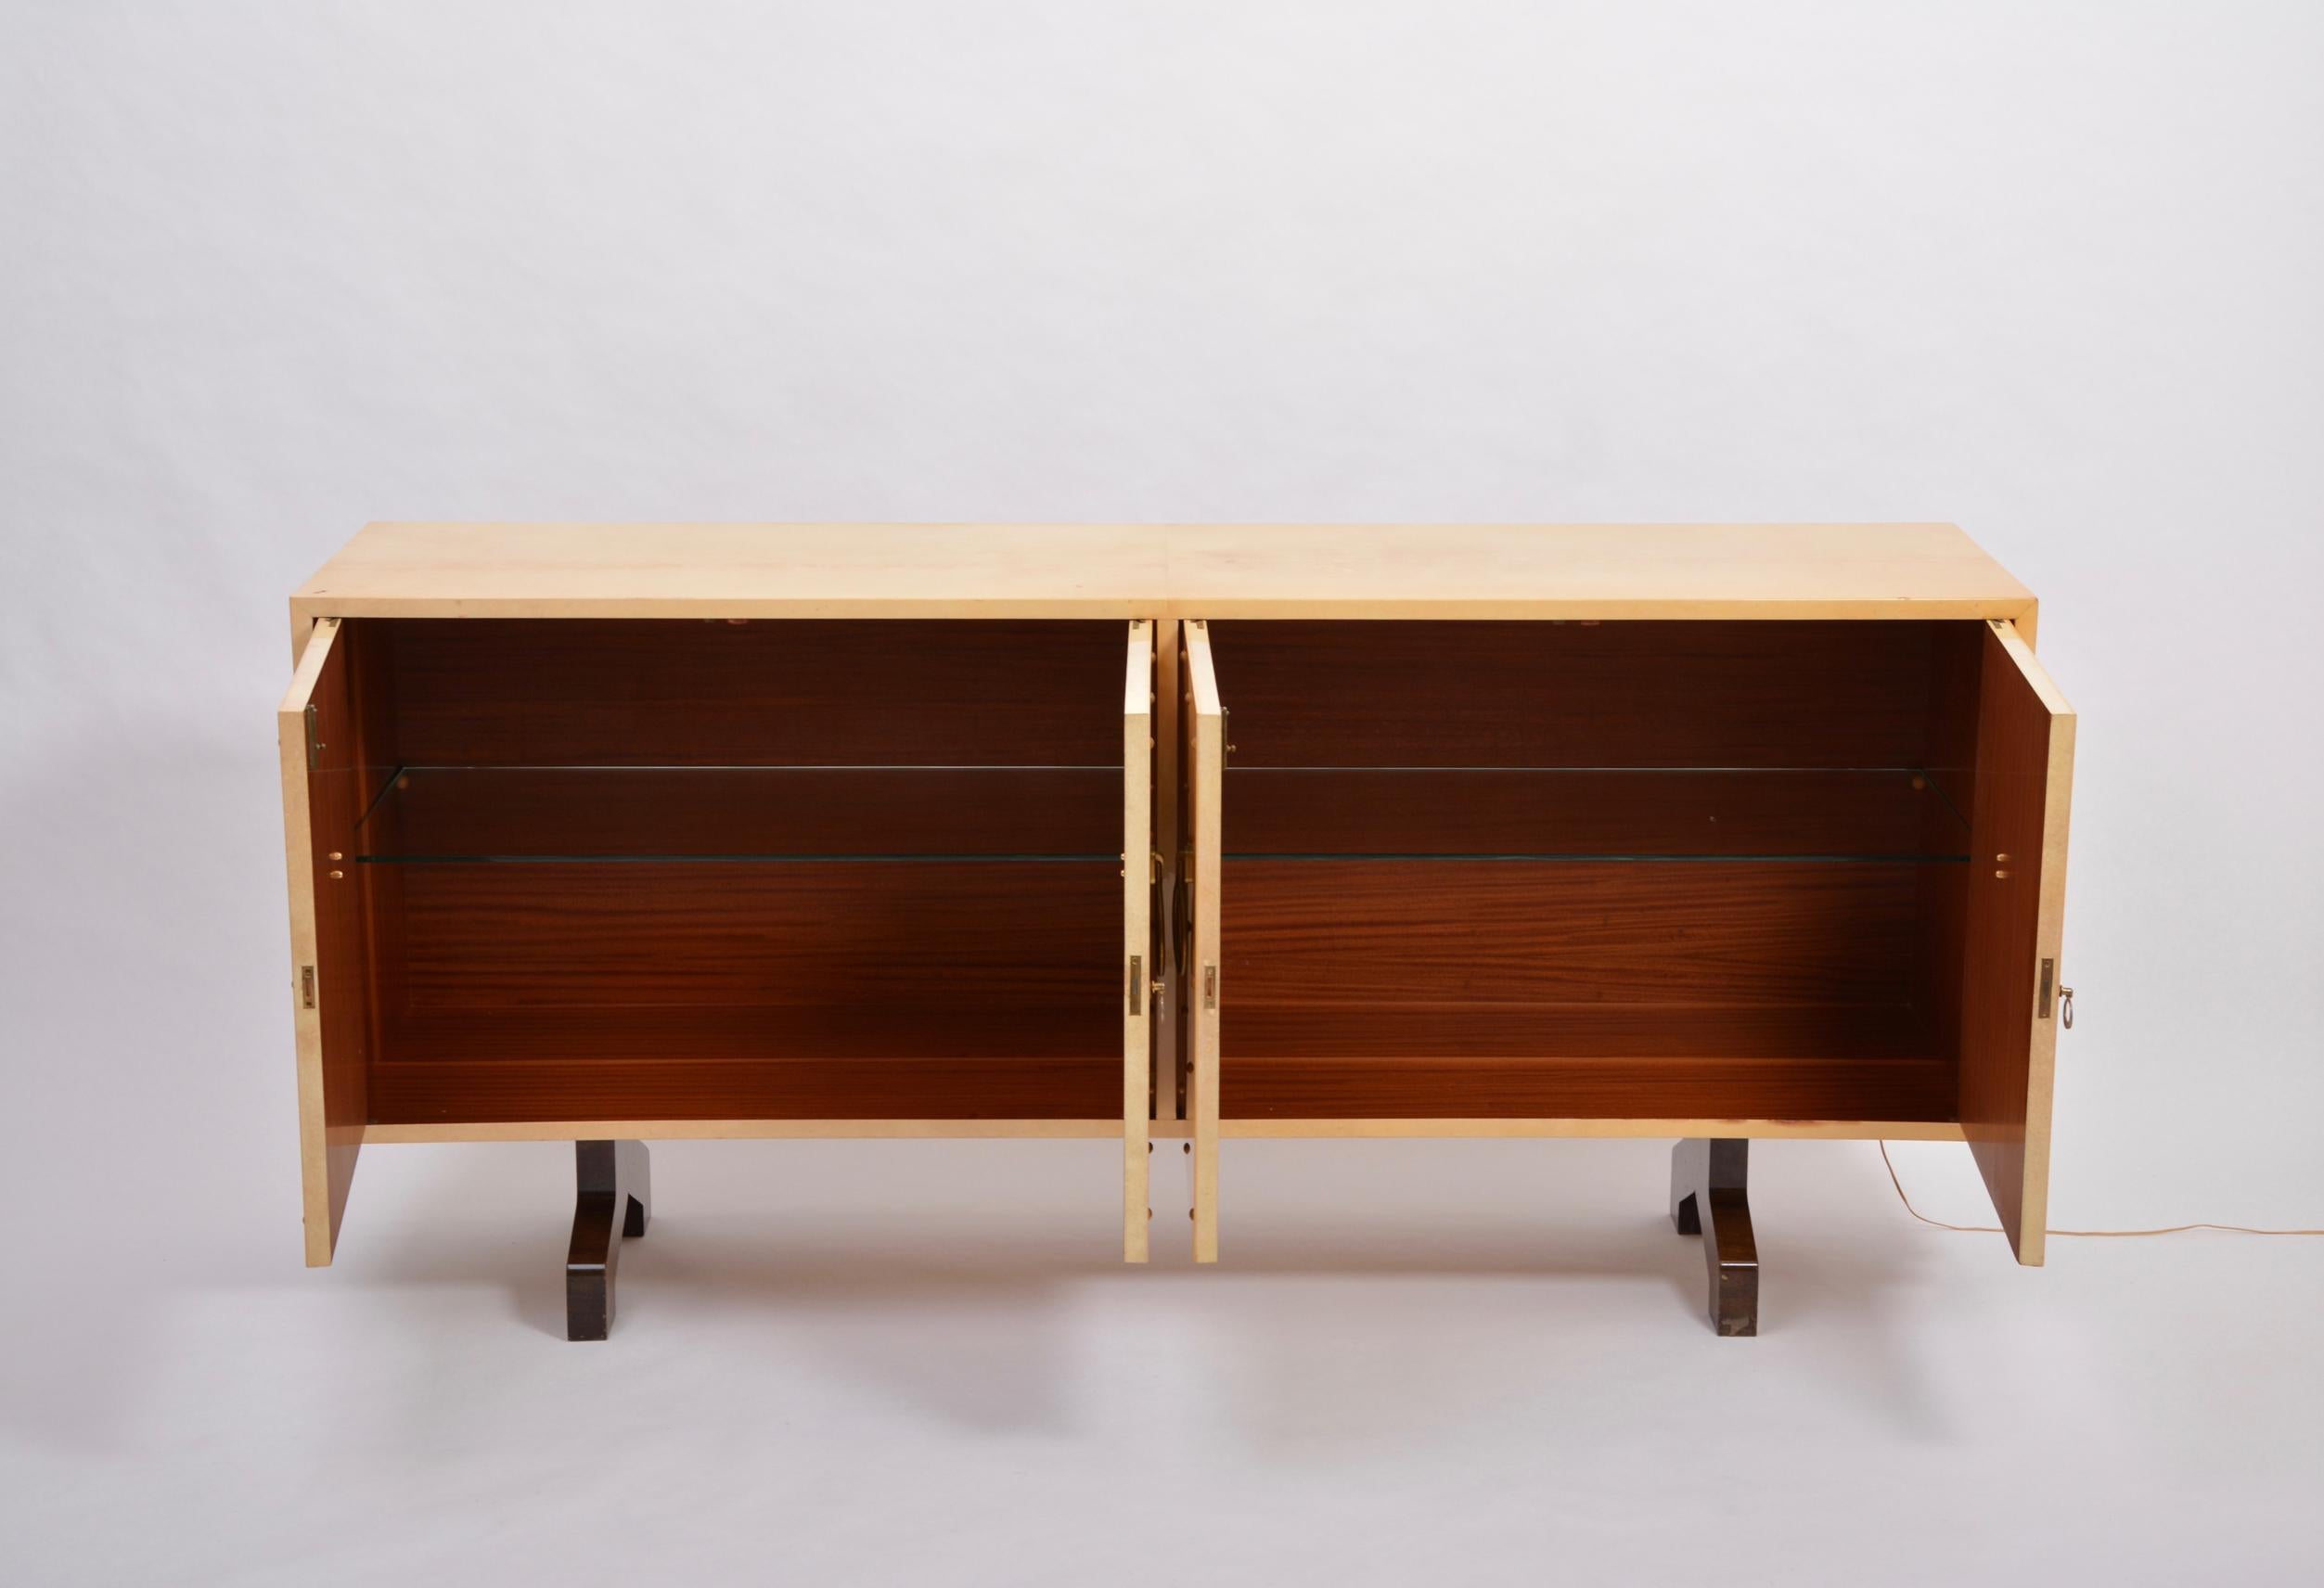 Midcentury sideboard in beige lacquered goat skin by Aldo Tura
Sideboard with two hinged doors designed by Aldo Tura and produced in Italy in the 1970s.
Wood covered with goatskin in a gorgeous beige color.
Each compartment features with a loose